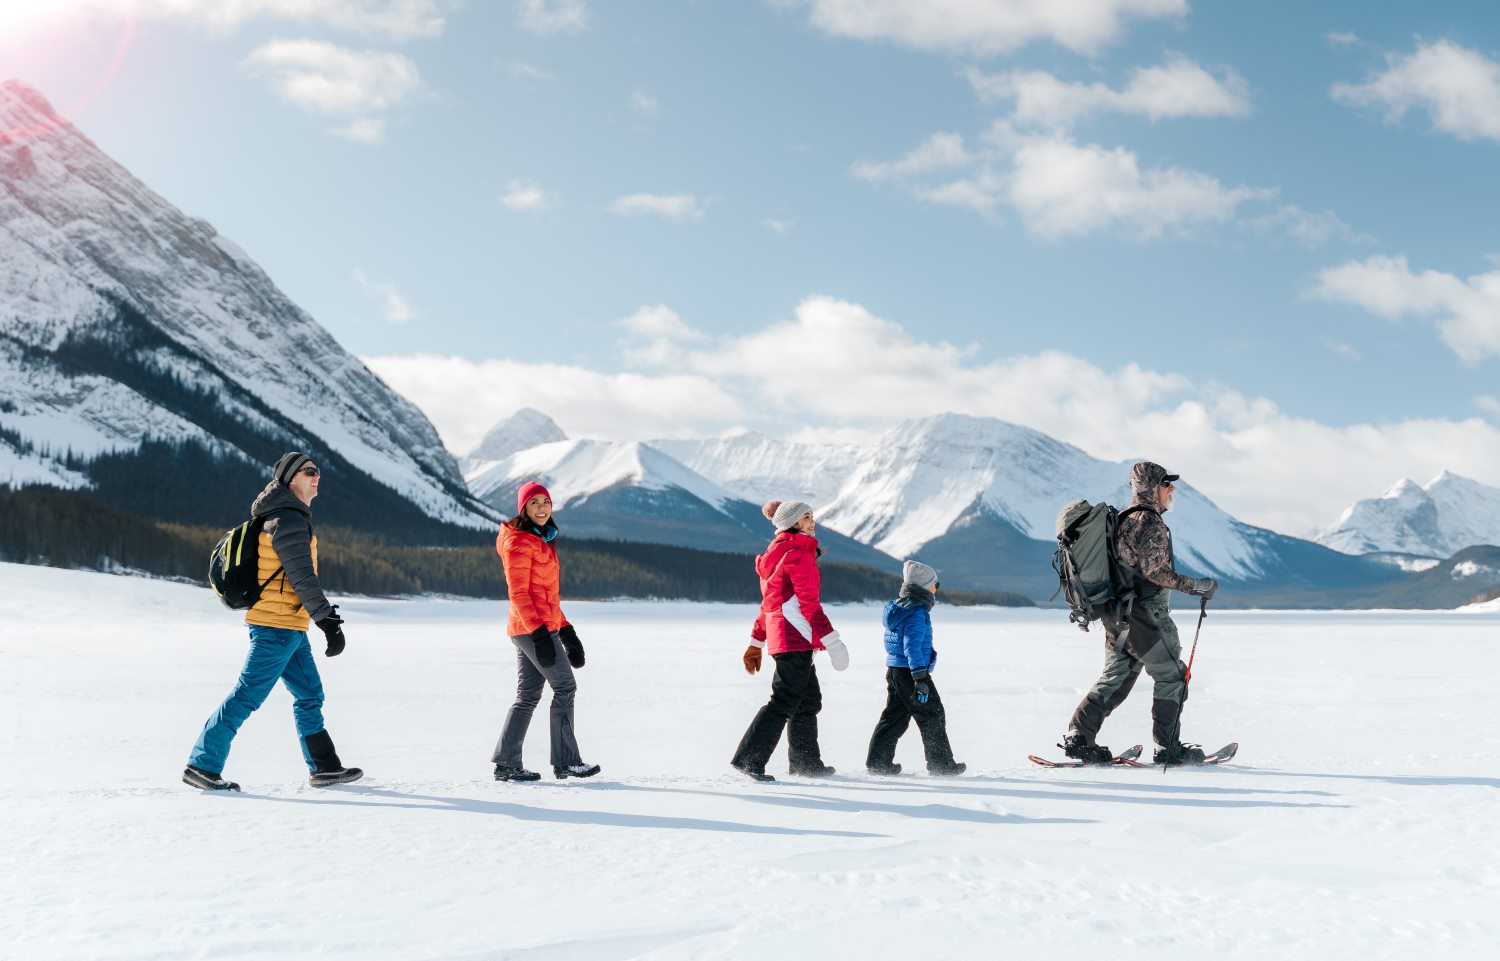 Your Winter Journey in Canmore and Kananaskis